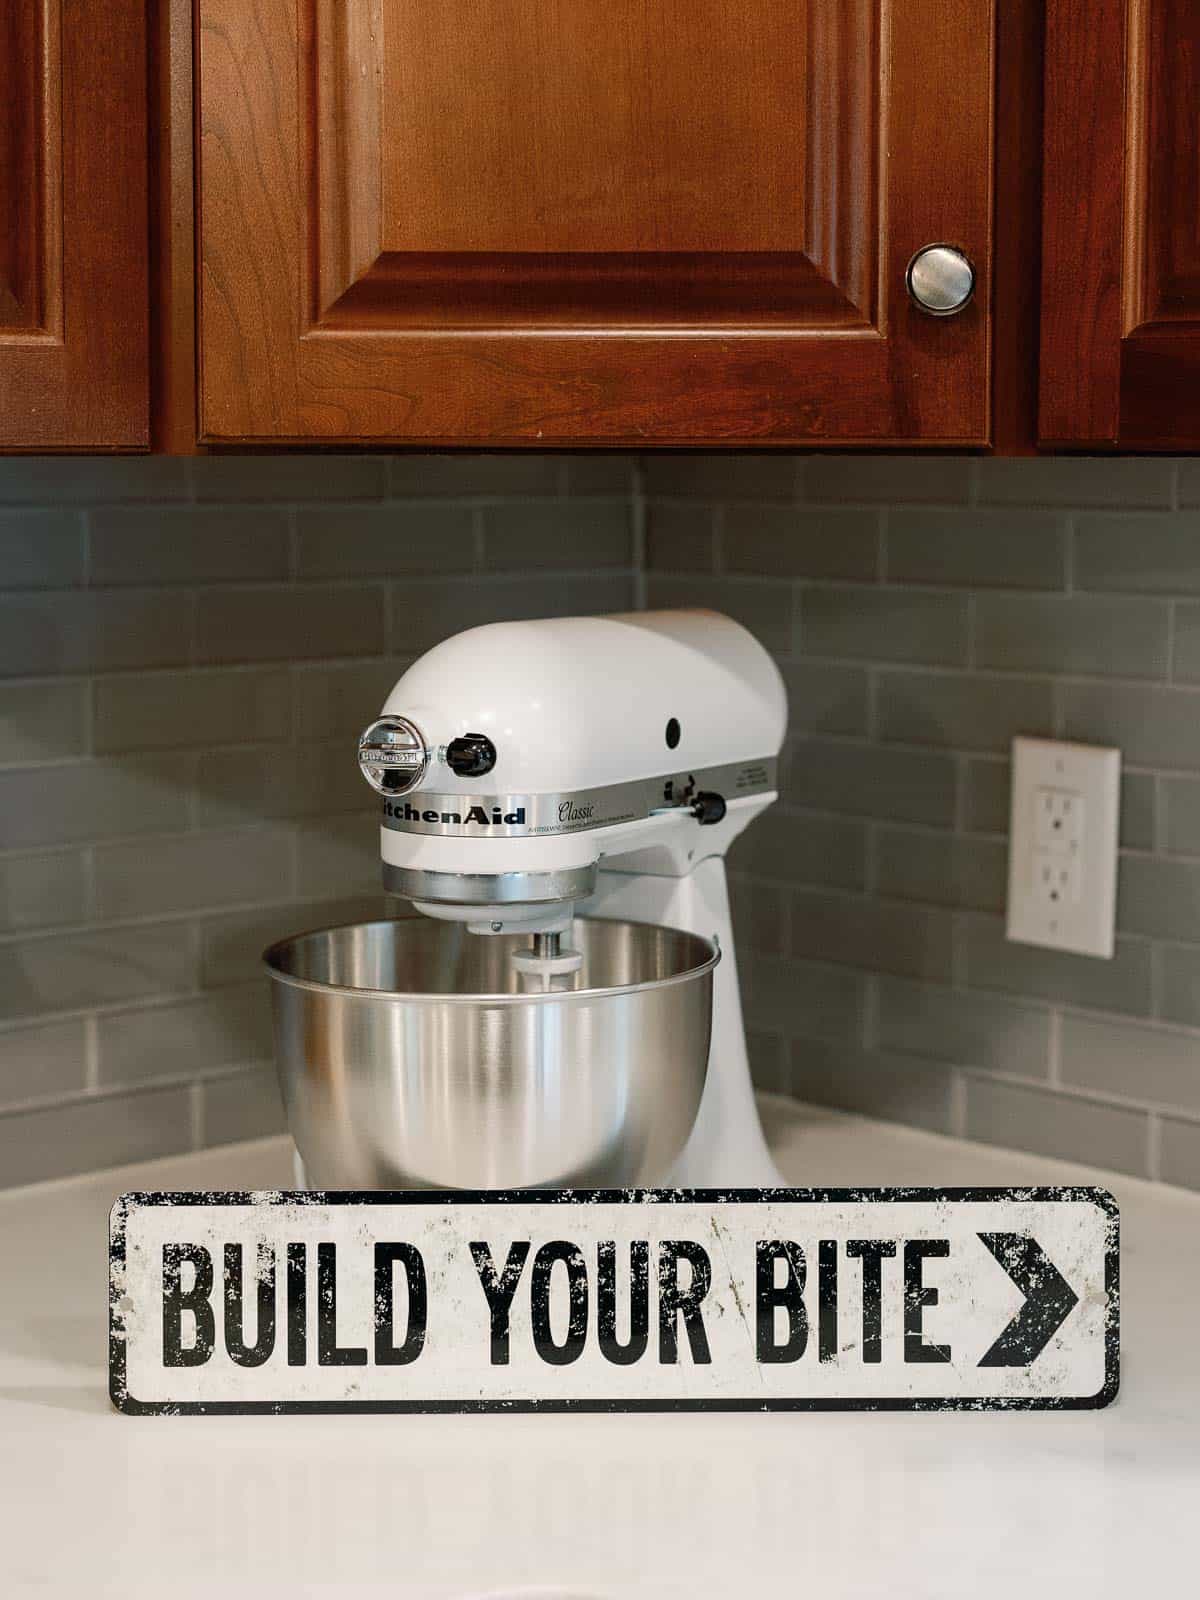 kitchenaid with a sign in front of it that reads "build your bite"